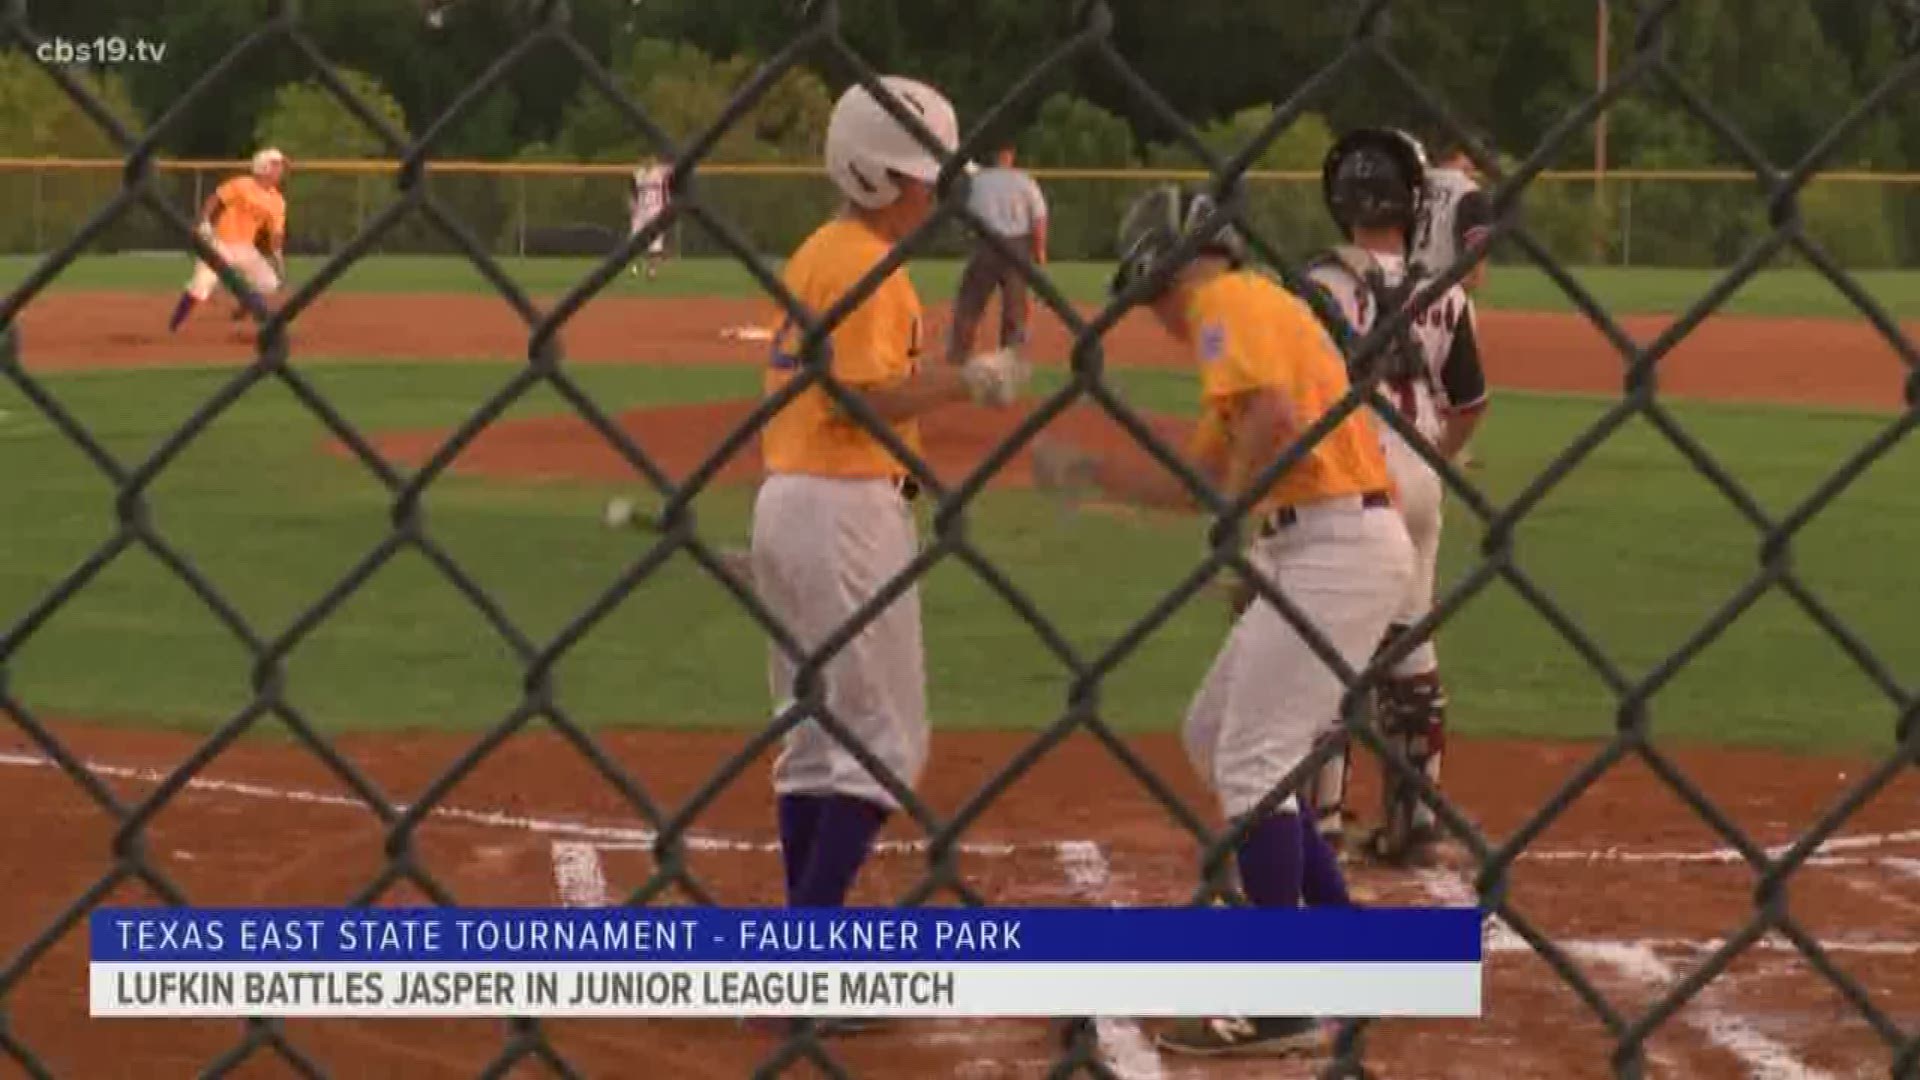 Lufkin All-Stars take care of business